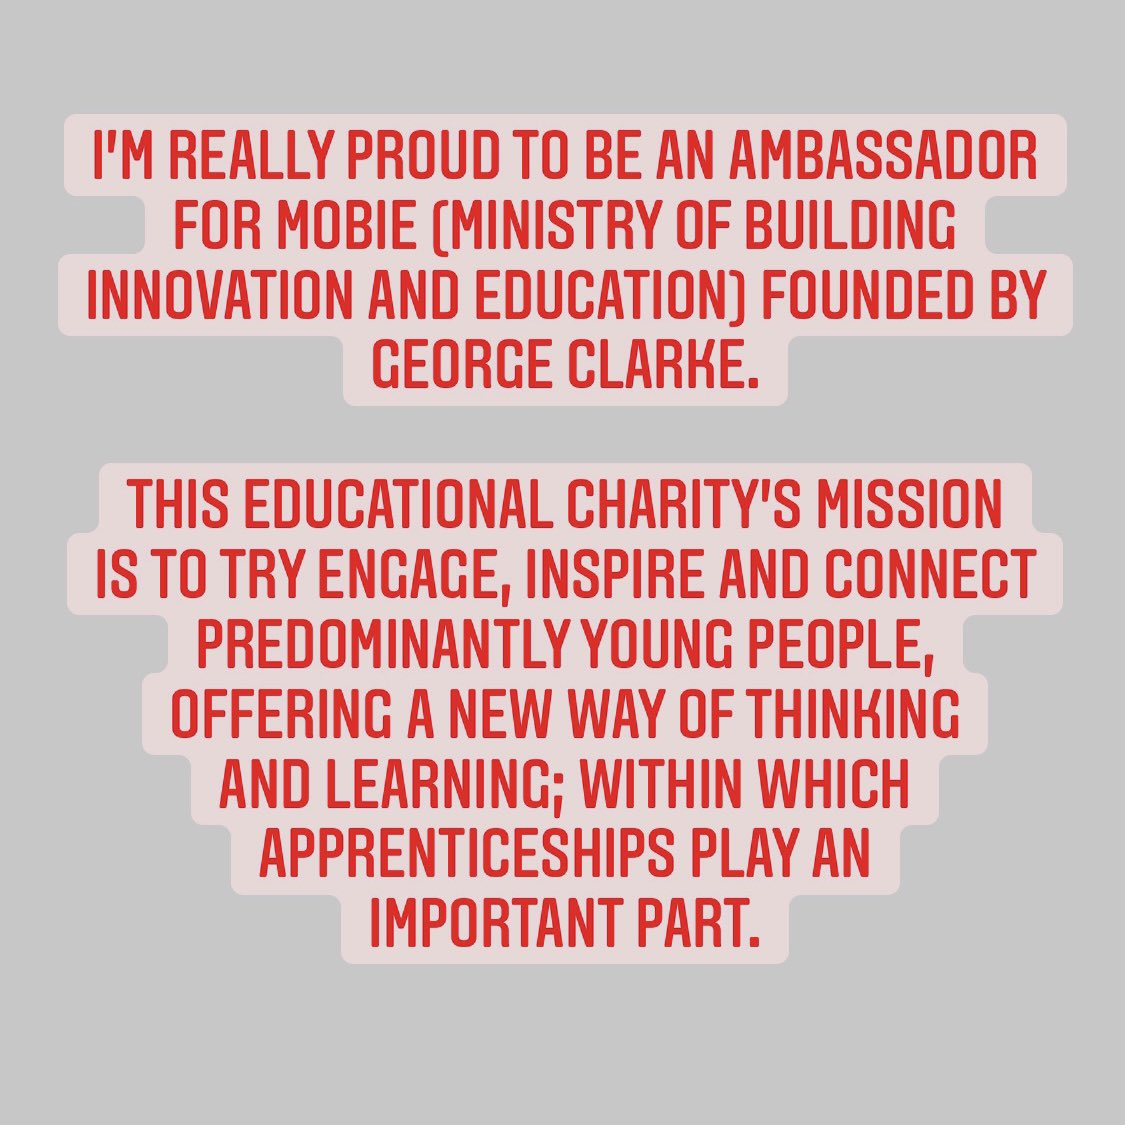 With it being National Apprenticeship Week, here’s my thoughts/experience on how amazing Apprenticeships are... #NAW2021 #NAW21 #apprenticeships #BuildTheFuture #futurelearning #nextgeneration